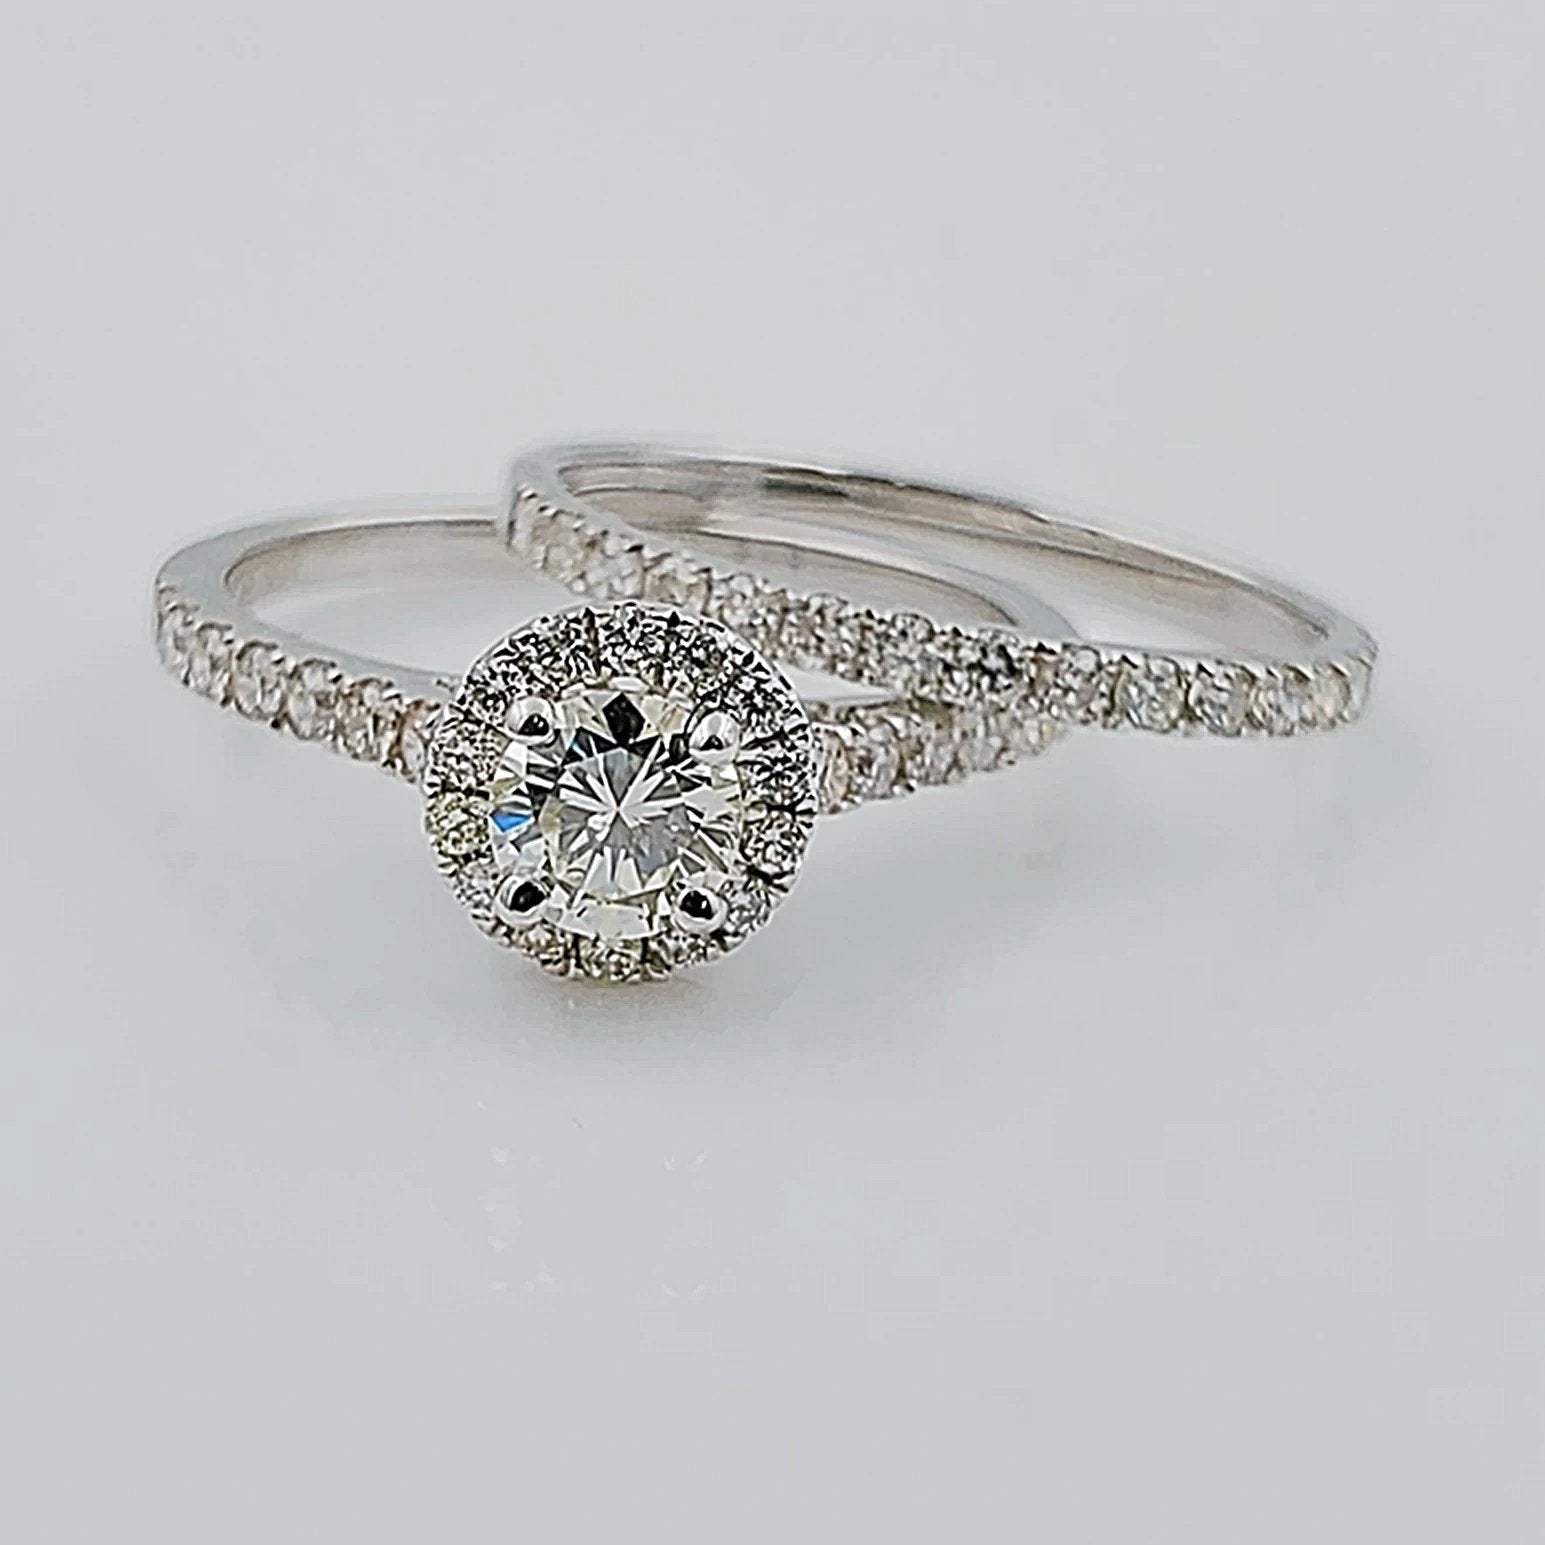 Women's 14K White Gold with Round 0.40 CT Center (SI1 Color J) Diamond 3.5 GR Total Weight Bridal Ring Set. (Size: 6.5)